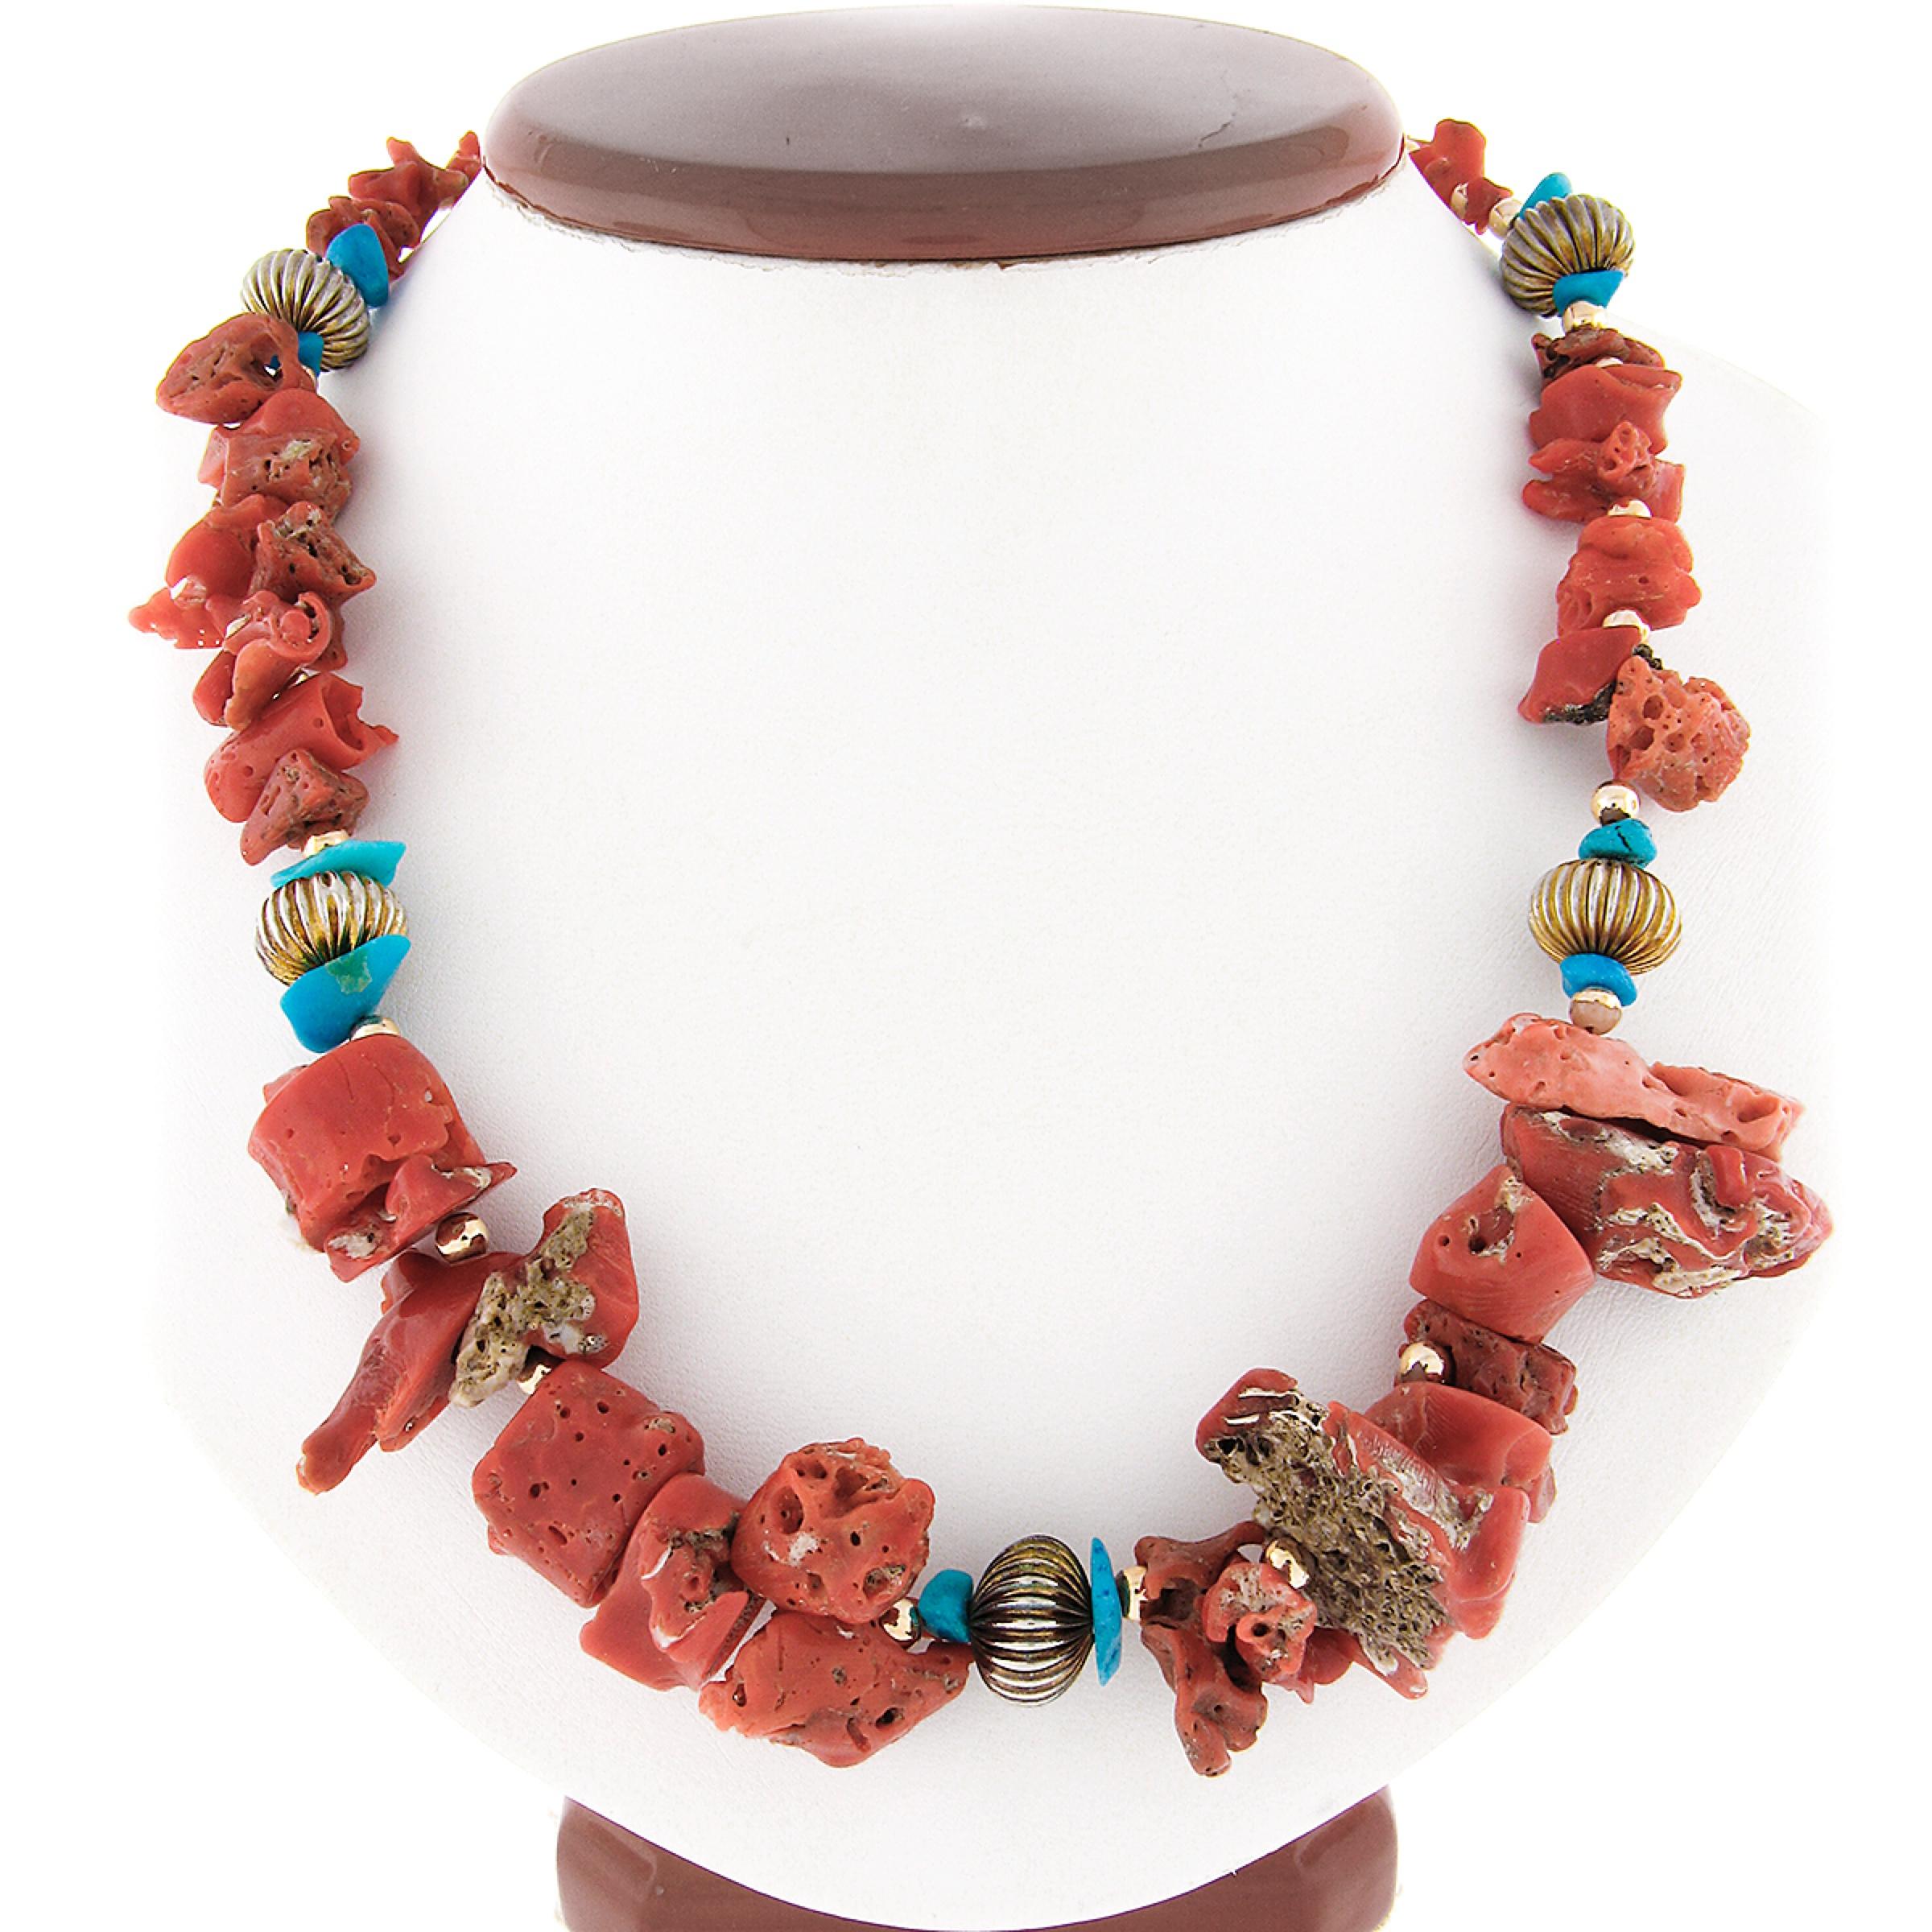 This magnificent strand necklace features natural freeform coral and turquoise beads neatly strung with metal bead spacers throughout. The gorgeous coral are GIA certified (2 beads were chosen at random for testing) as being 100% natural with a